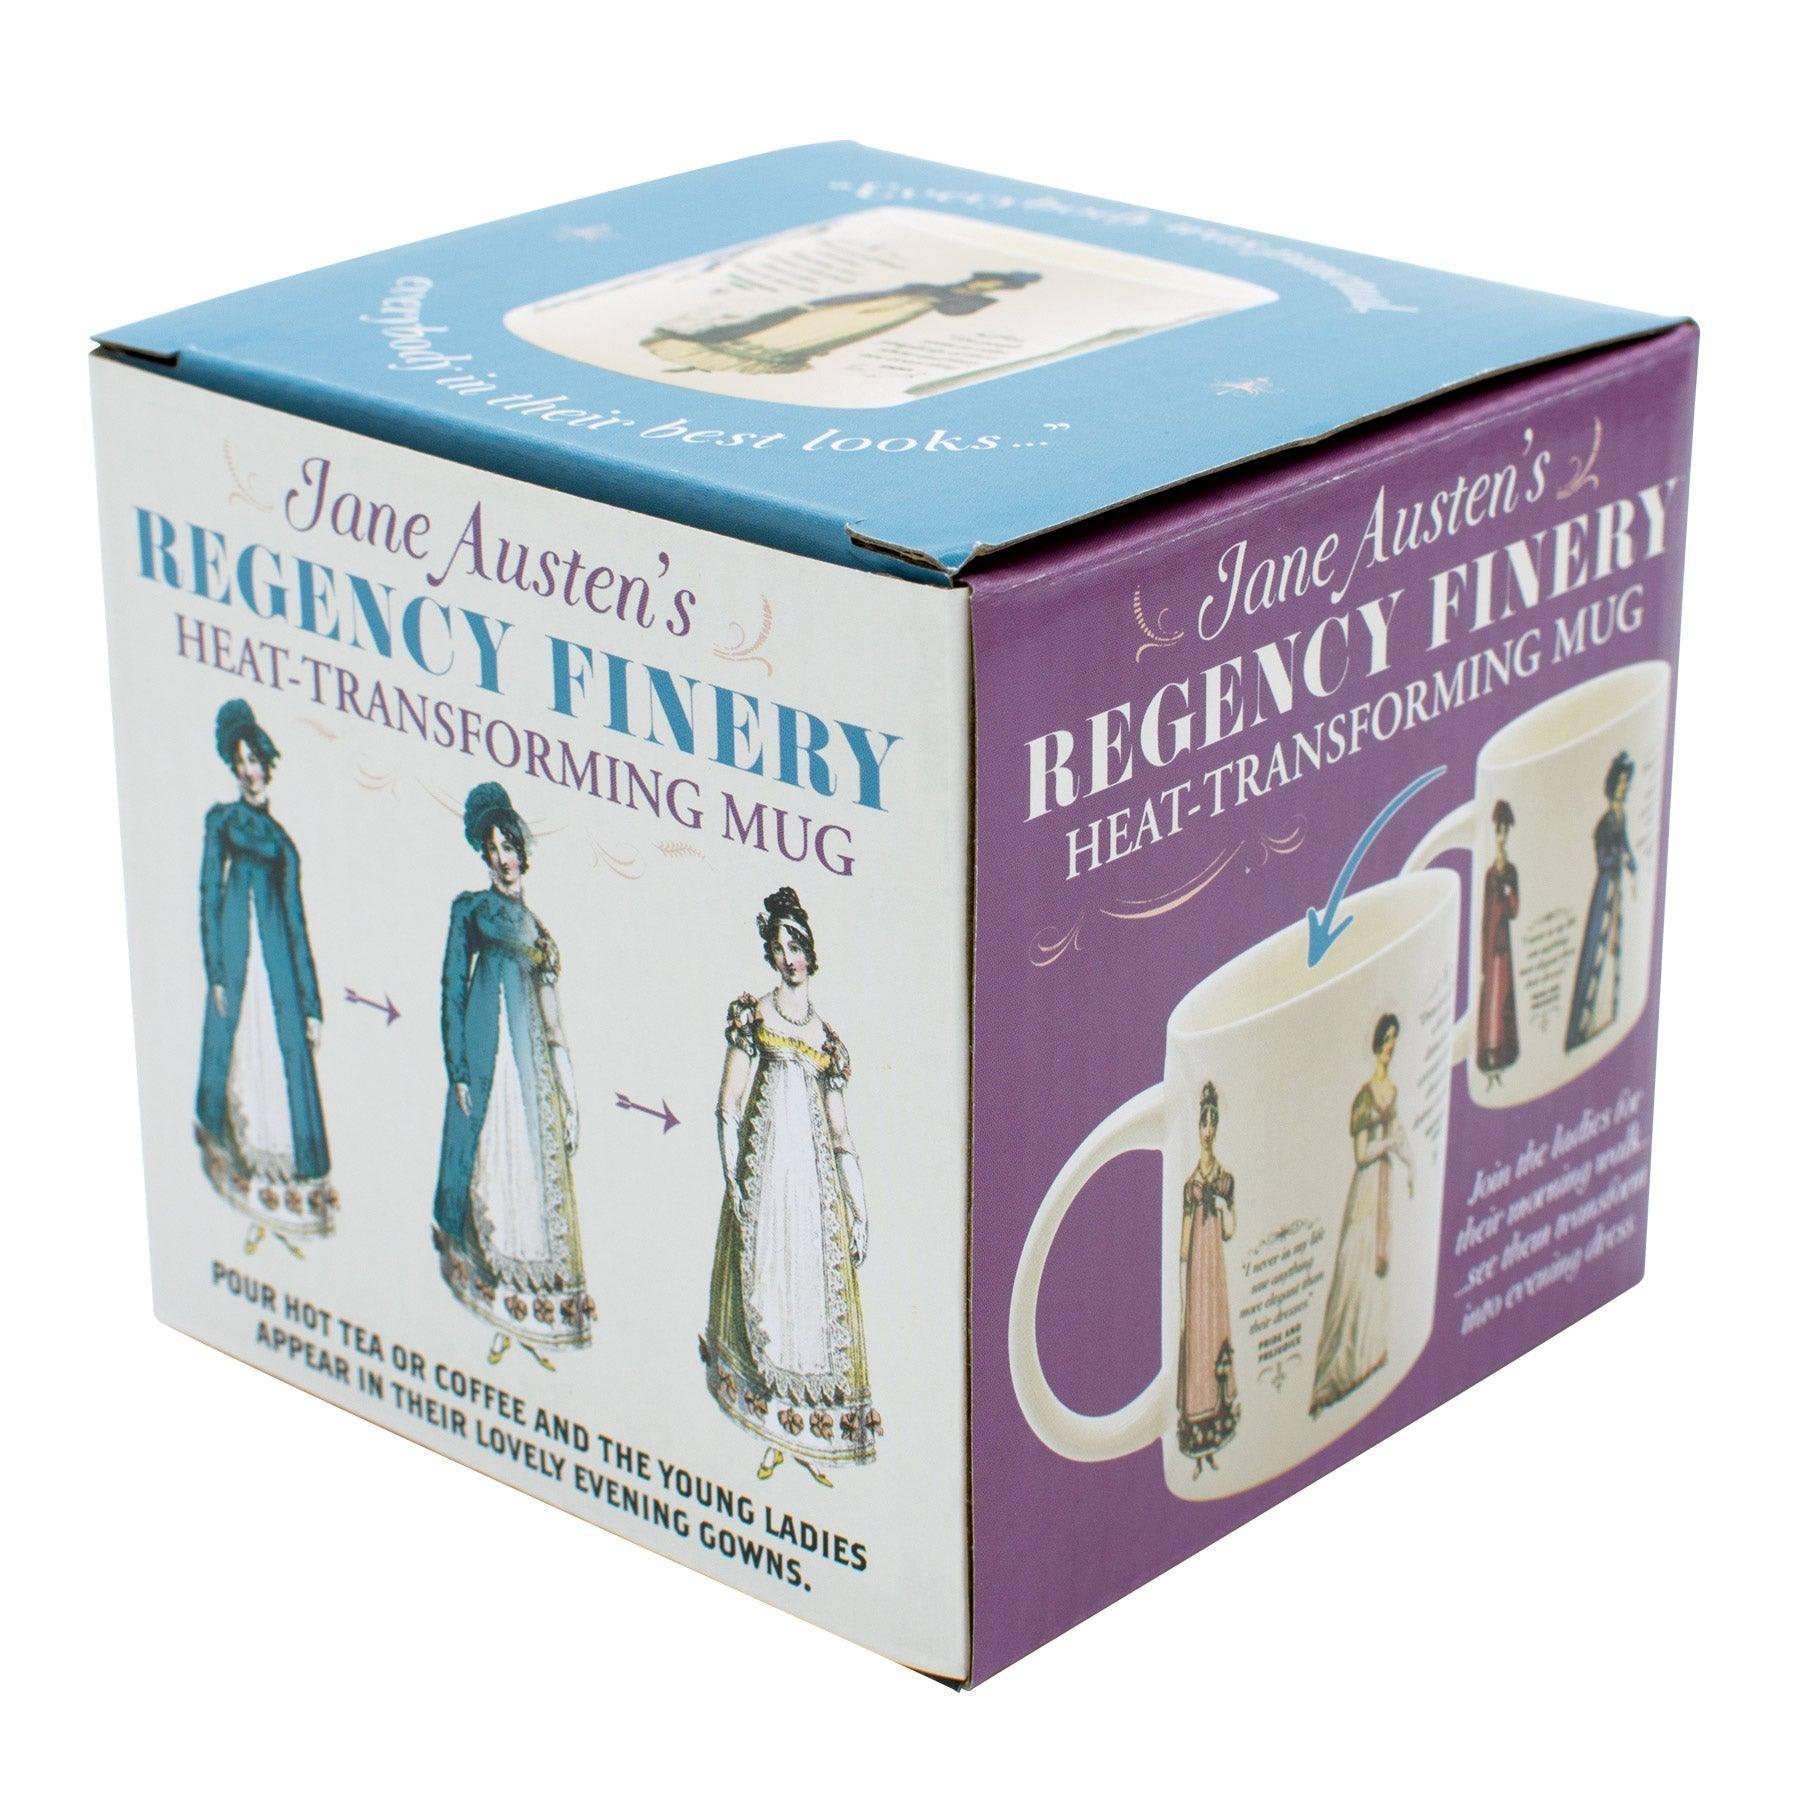 Product photo of Jane Austen Regency Finery Heat-Changing Mug, a novelty gift manufactured by The Unemployed Philosophers Guild.